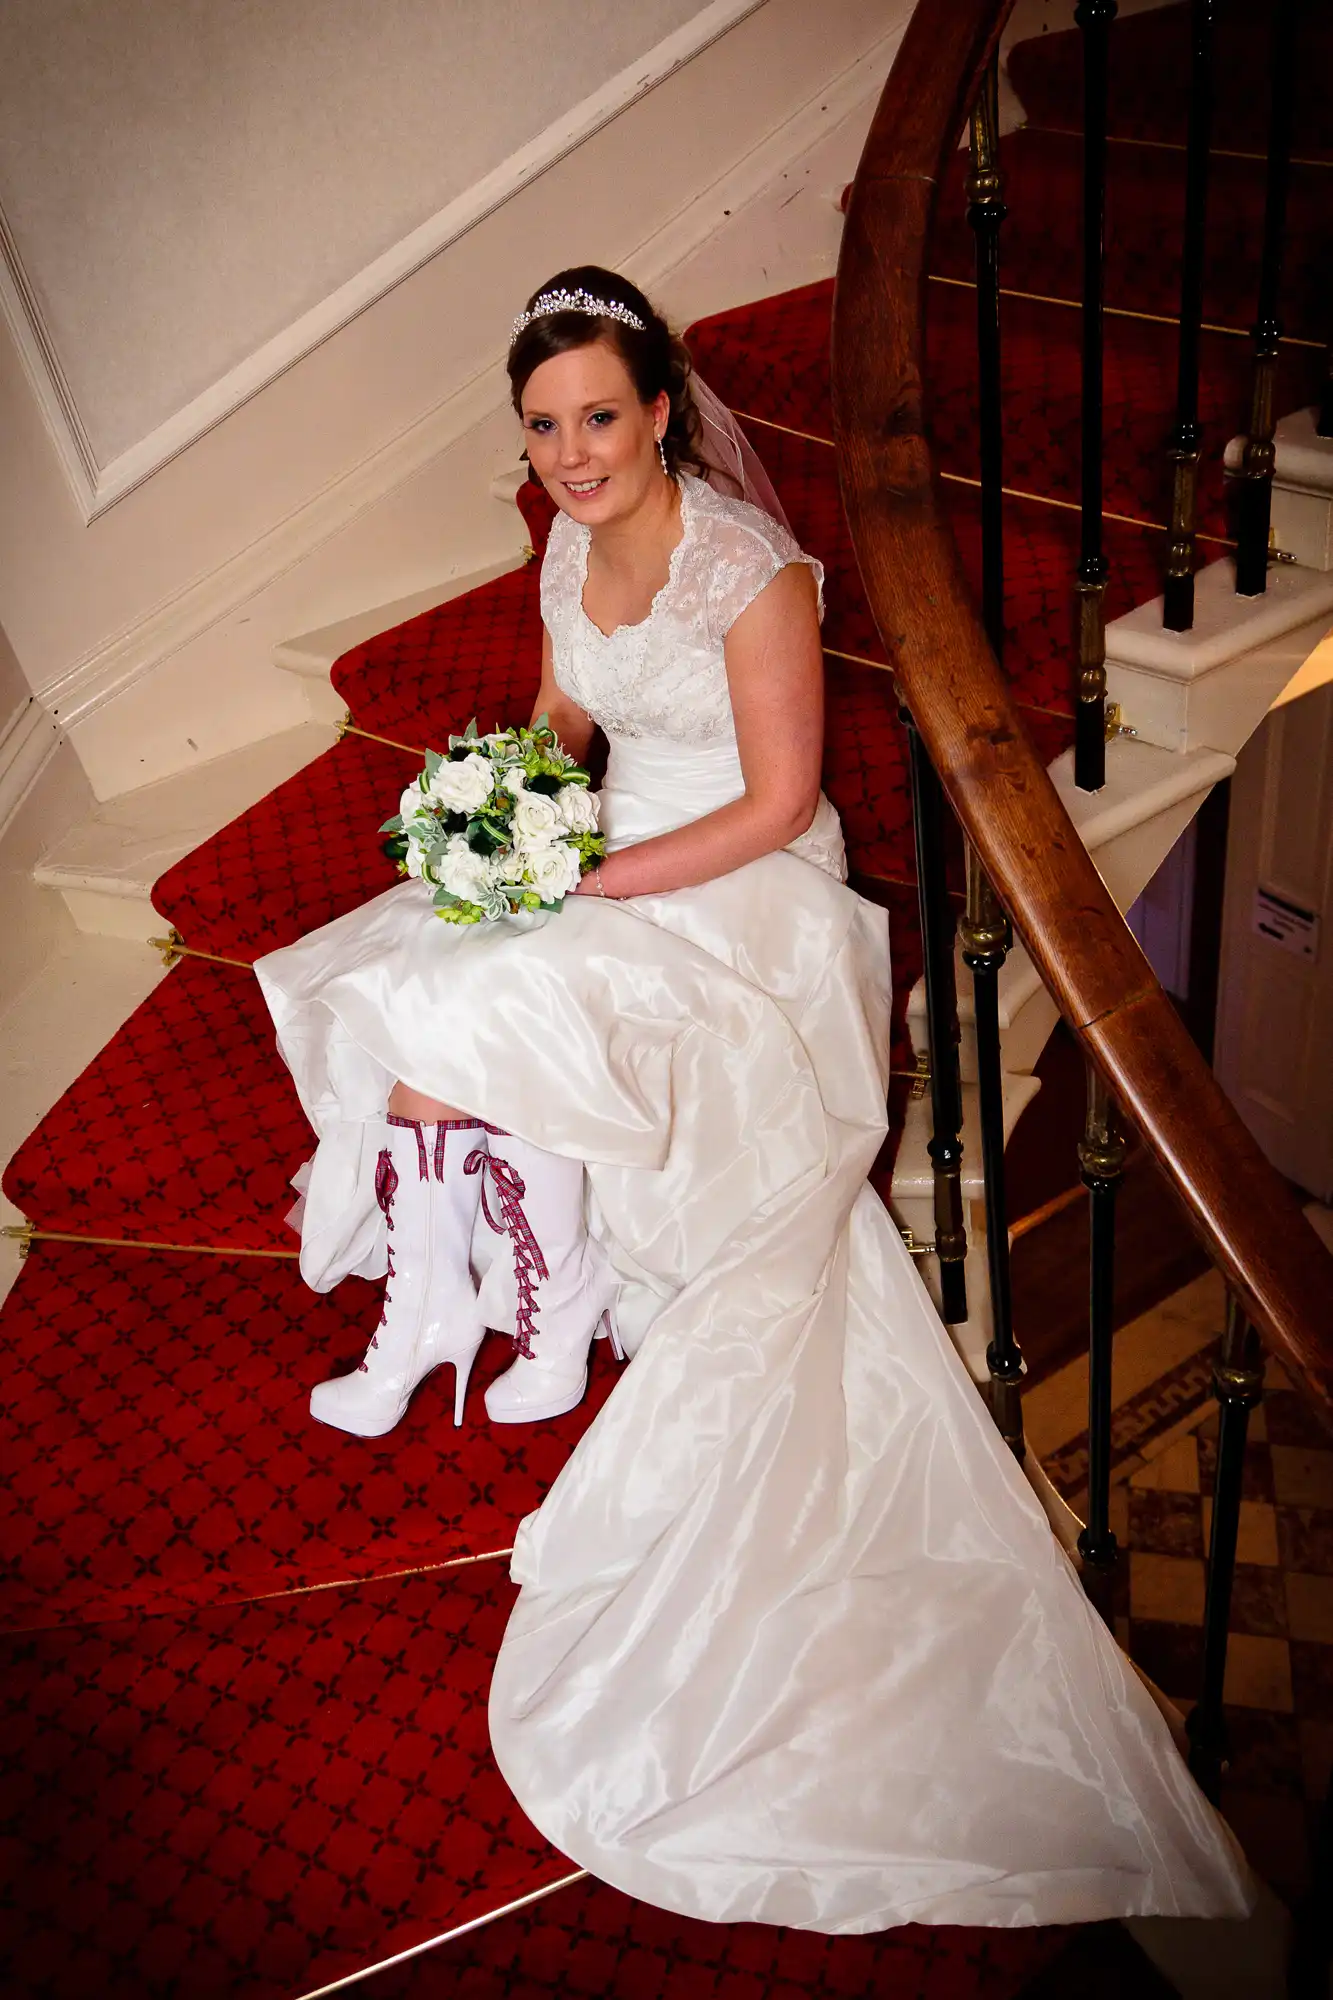 A bride sitting on a staircase in a white dress, holding a bouquet, with a patterned red carpet.